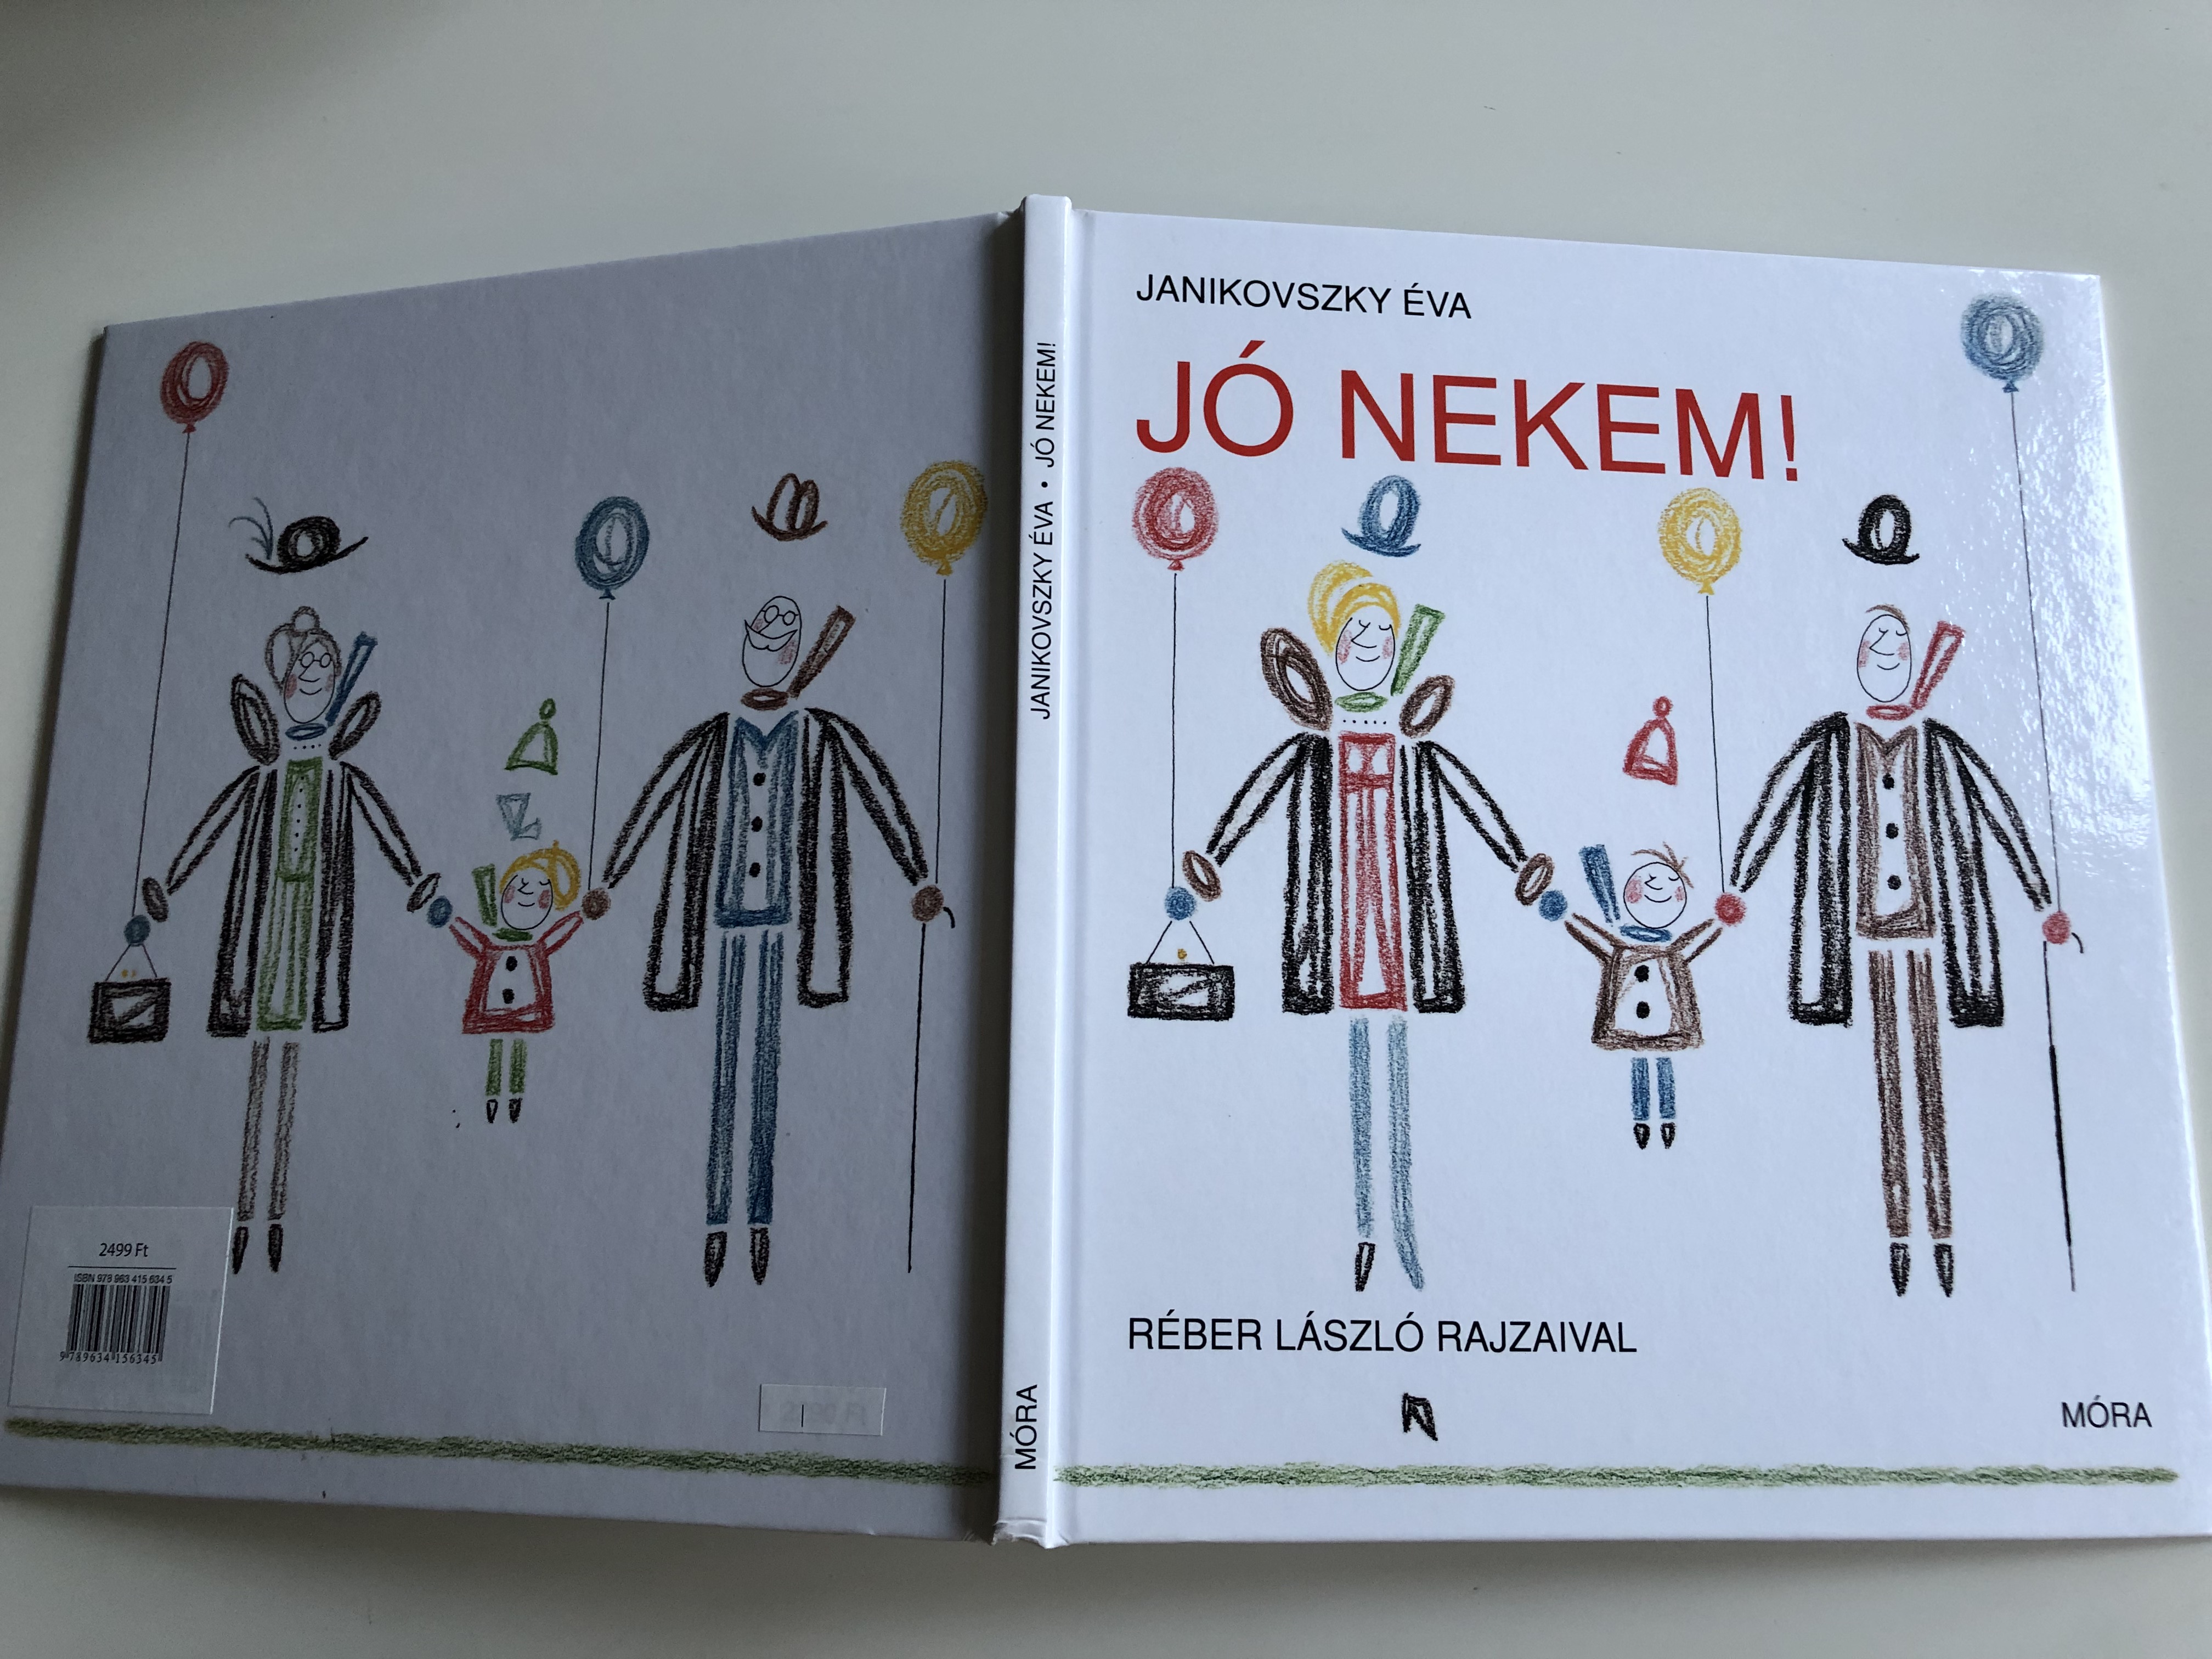 j-nekem-by-janikovszky-va-good-for-me-hungarian-children-s-book-for-ages-3-and-up-r-ber-l-szl-rajzaival-m-ra-k-nyvkiad-2012-7th-edition-9-.jpg